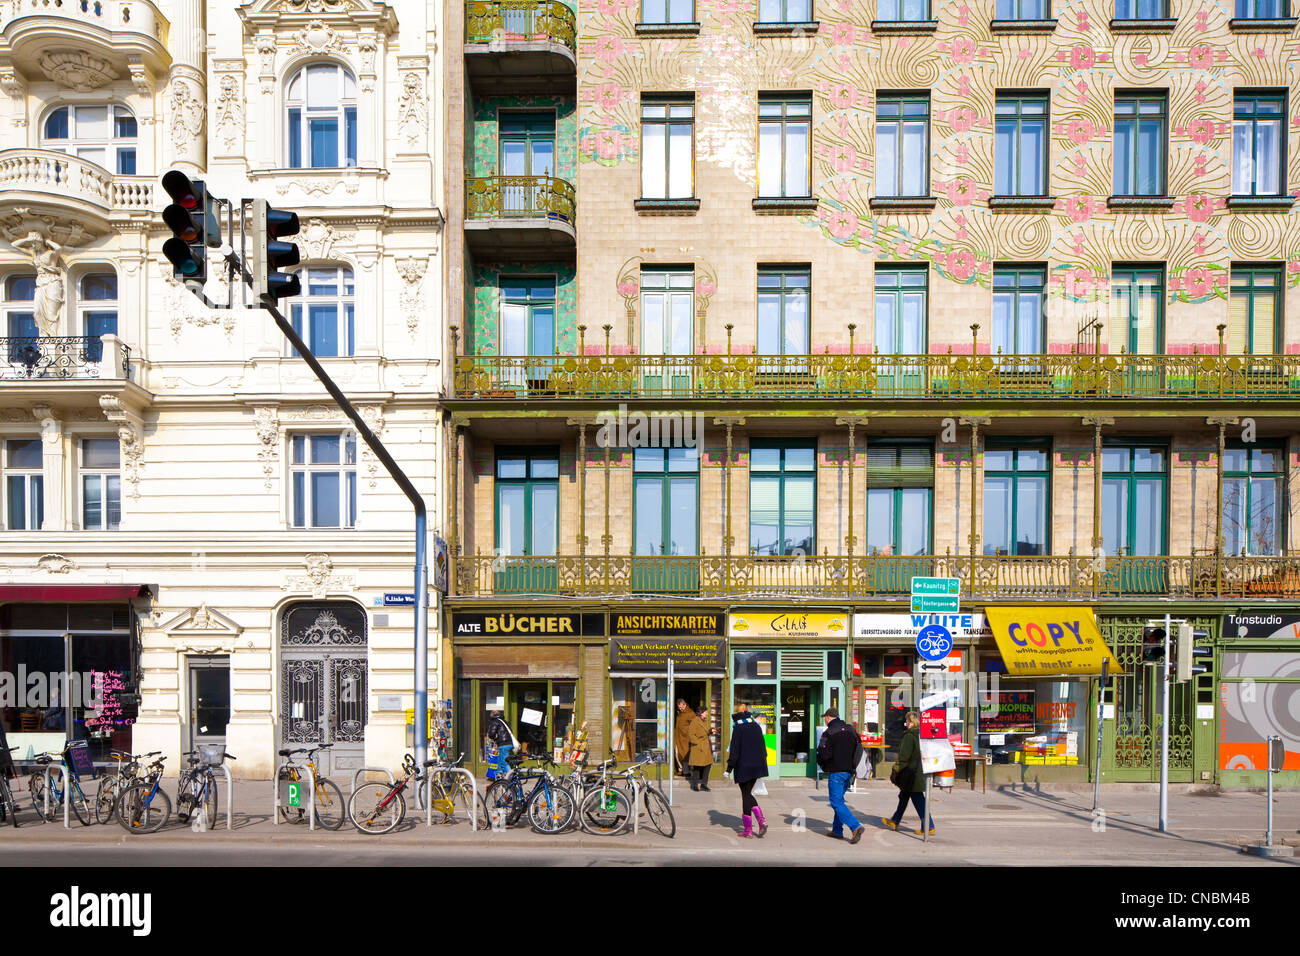 Austria, Vienna, Linke Wienzeile, Majolica House built in 1898 by Otto Wagner, decorated with tiles Stock Photo